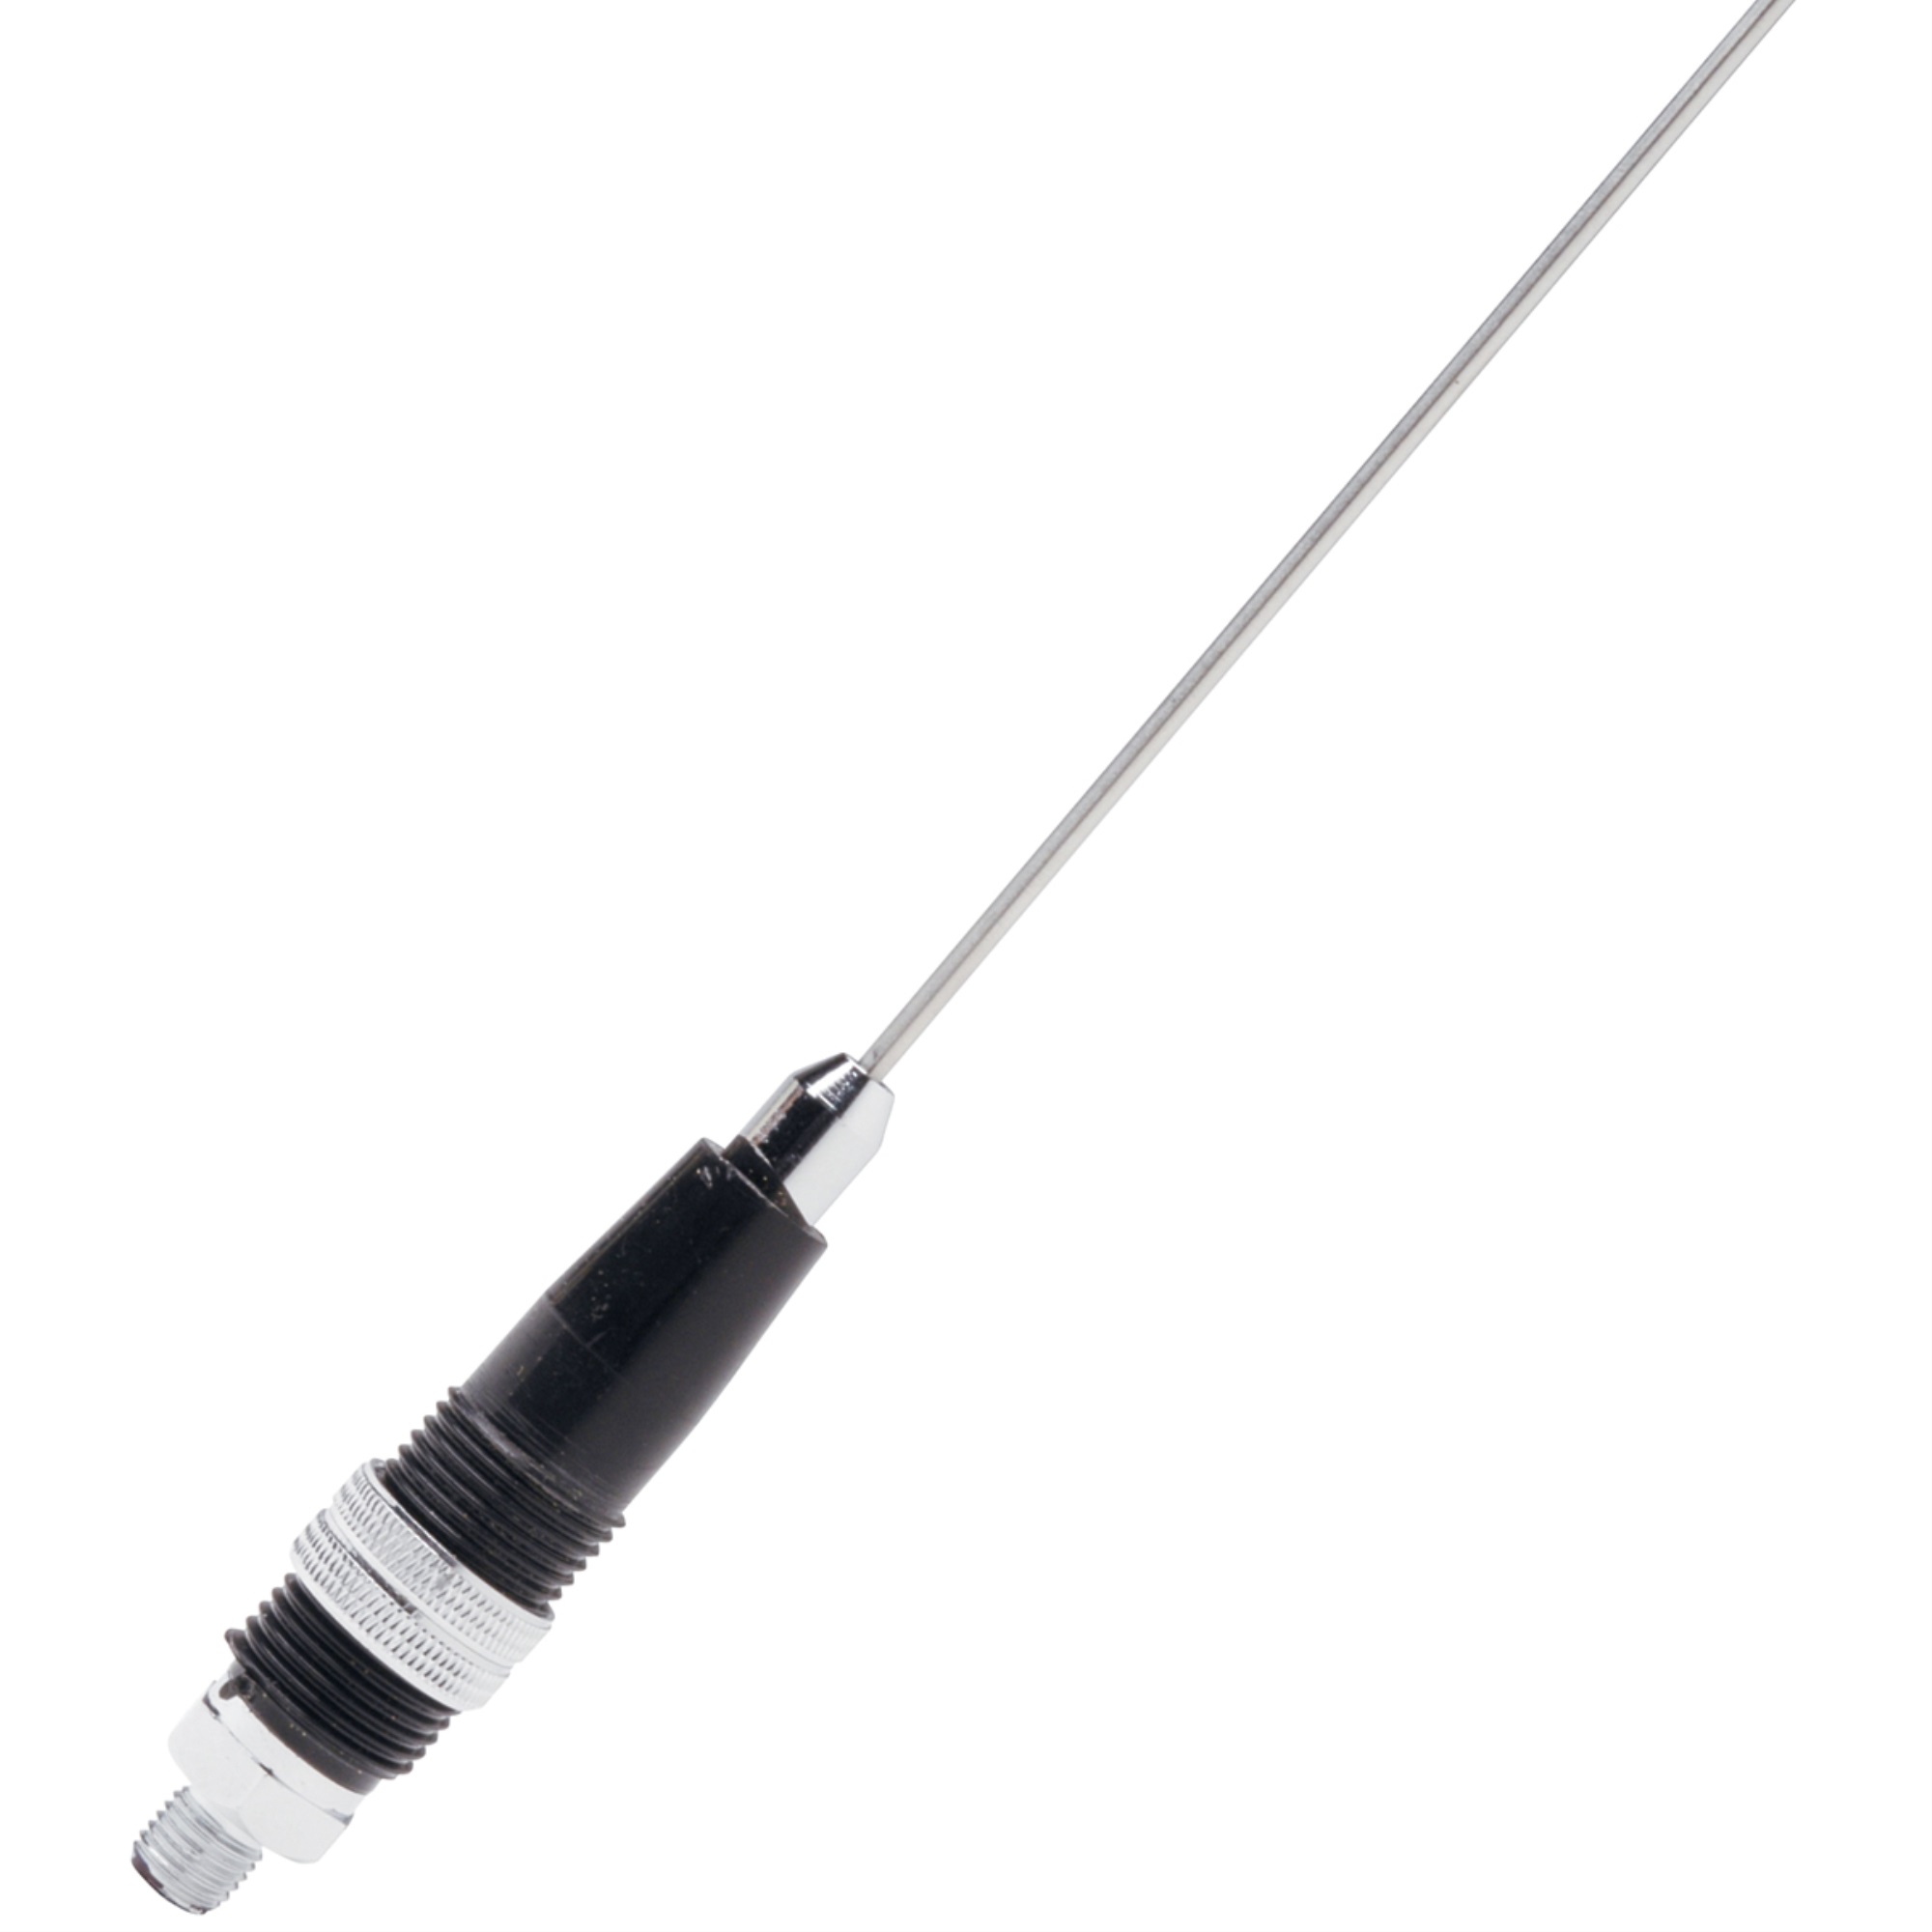 Solarcon A-112 3.5FT Tunable Stainless Steel CB Antenna Whip - 50 Watt 3.5-Foot CB Radio Antenna Whip Universal Fit - Bl